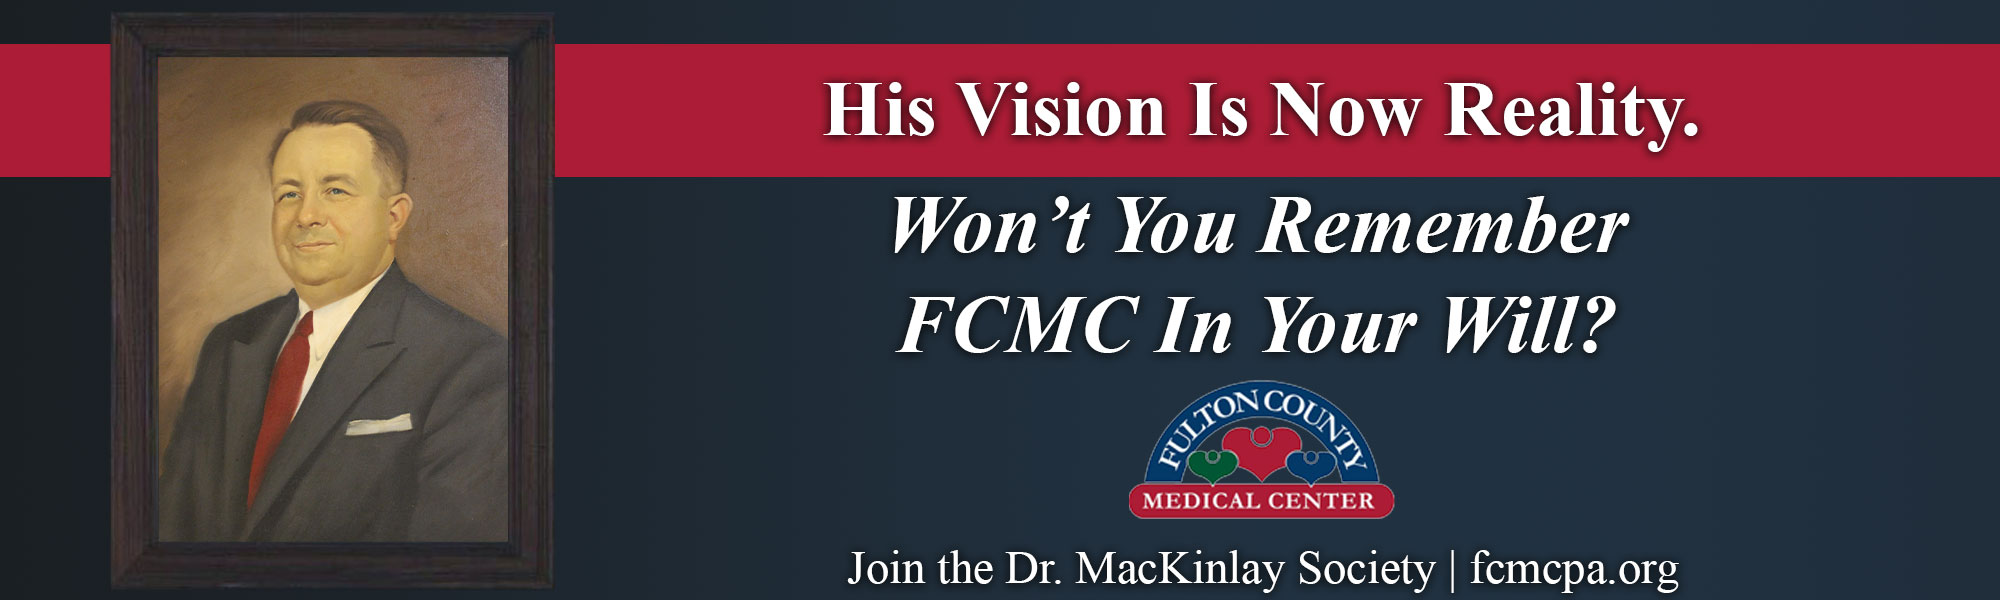 Dr. MacKinlay 
His Vision is Now Reality
Won't You Remember FCMC In Your Will?
Join the Dr. MacKinlay Society | fcmcpa.org